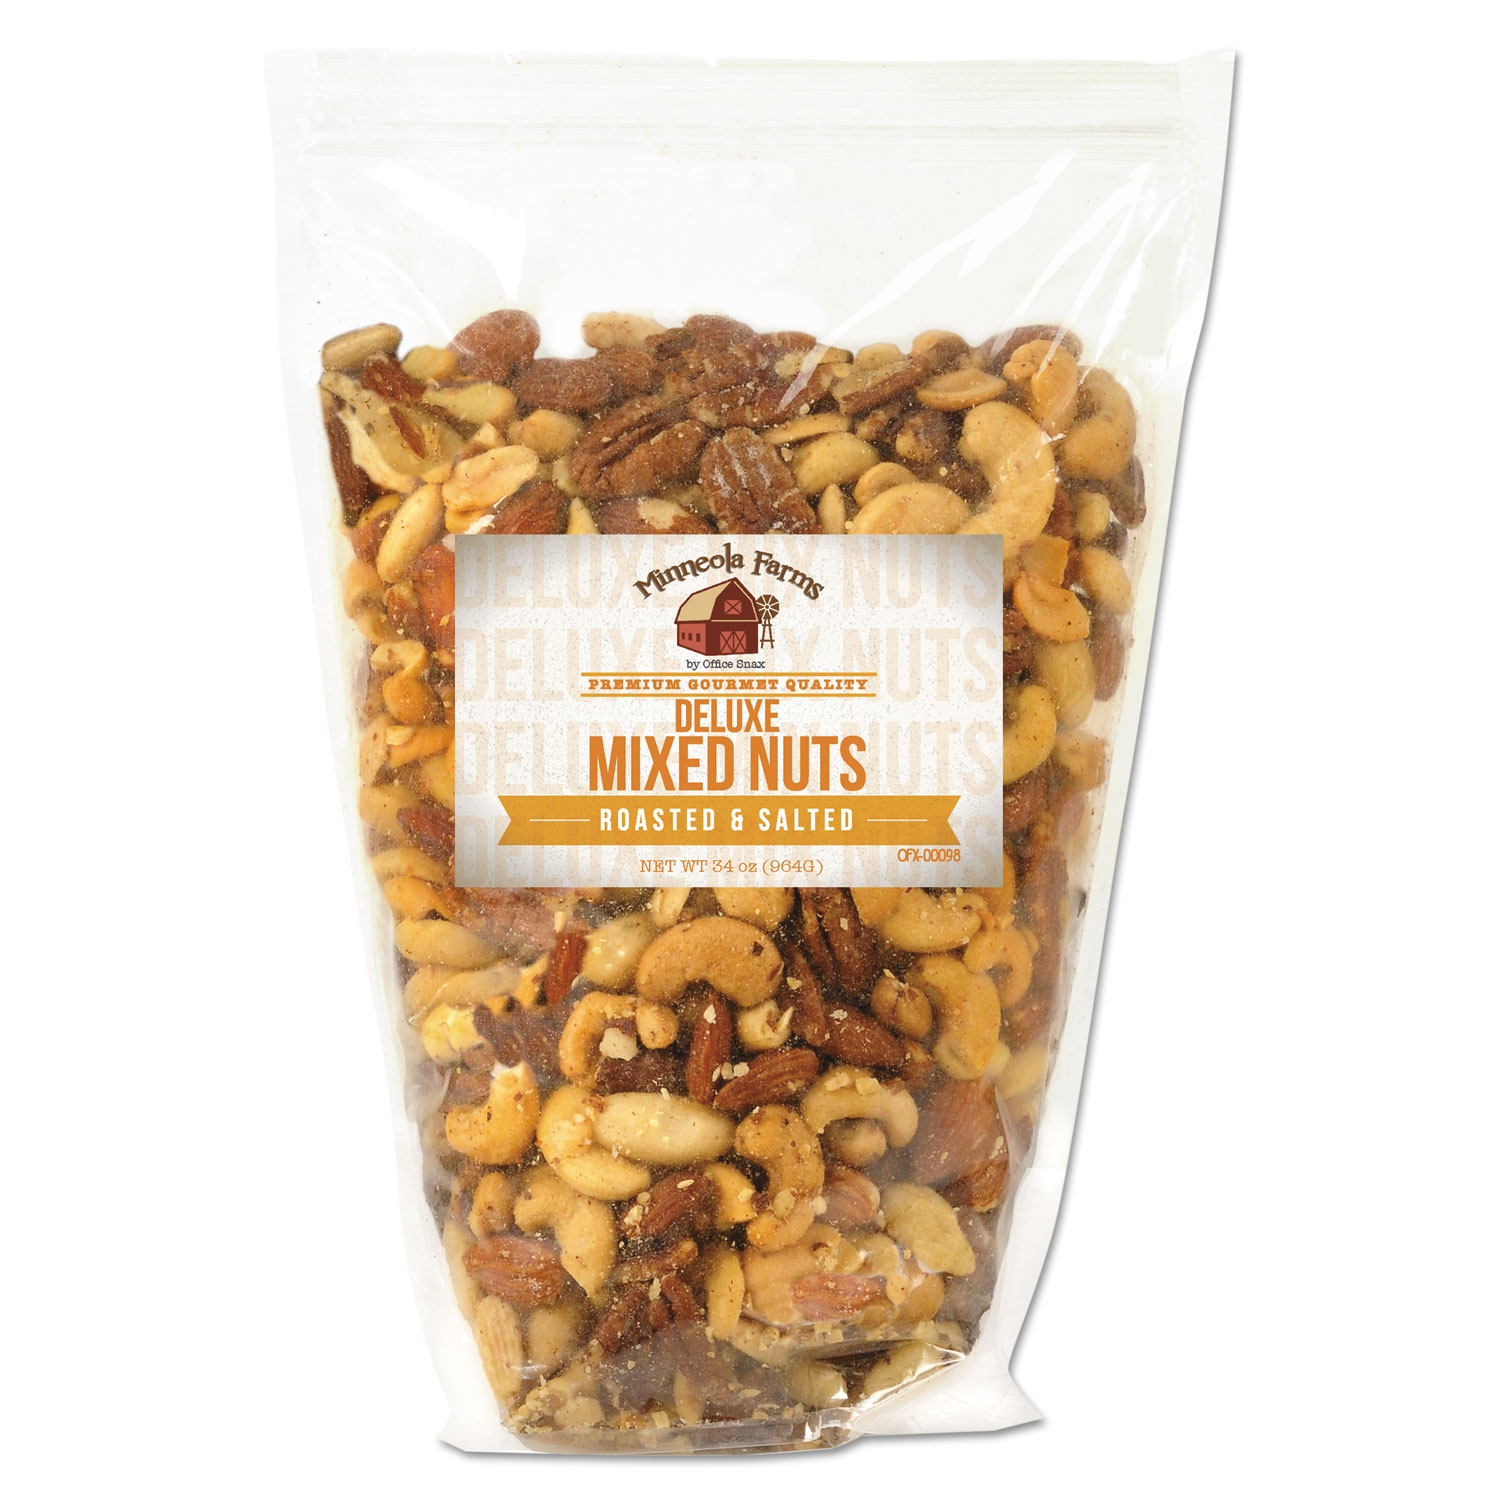 All Tyme Favorite Nuts, Deluxe Nut Mix, 34 oz Bag